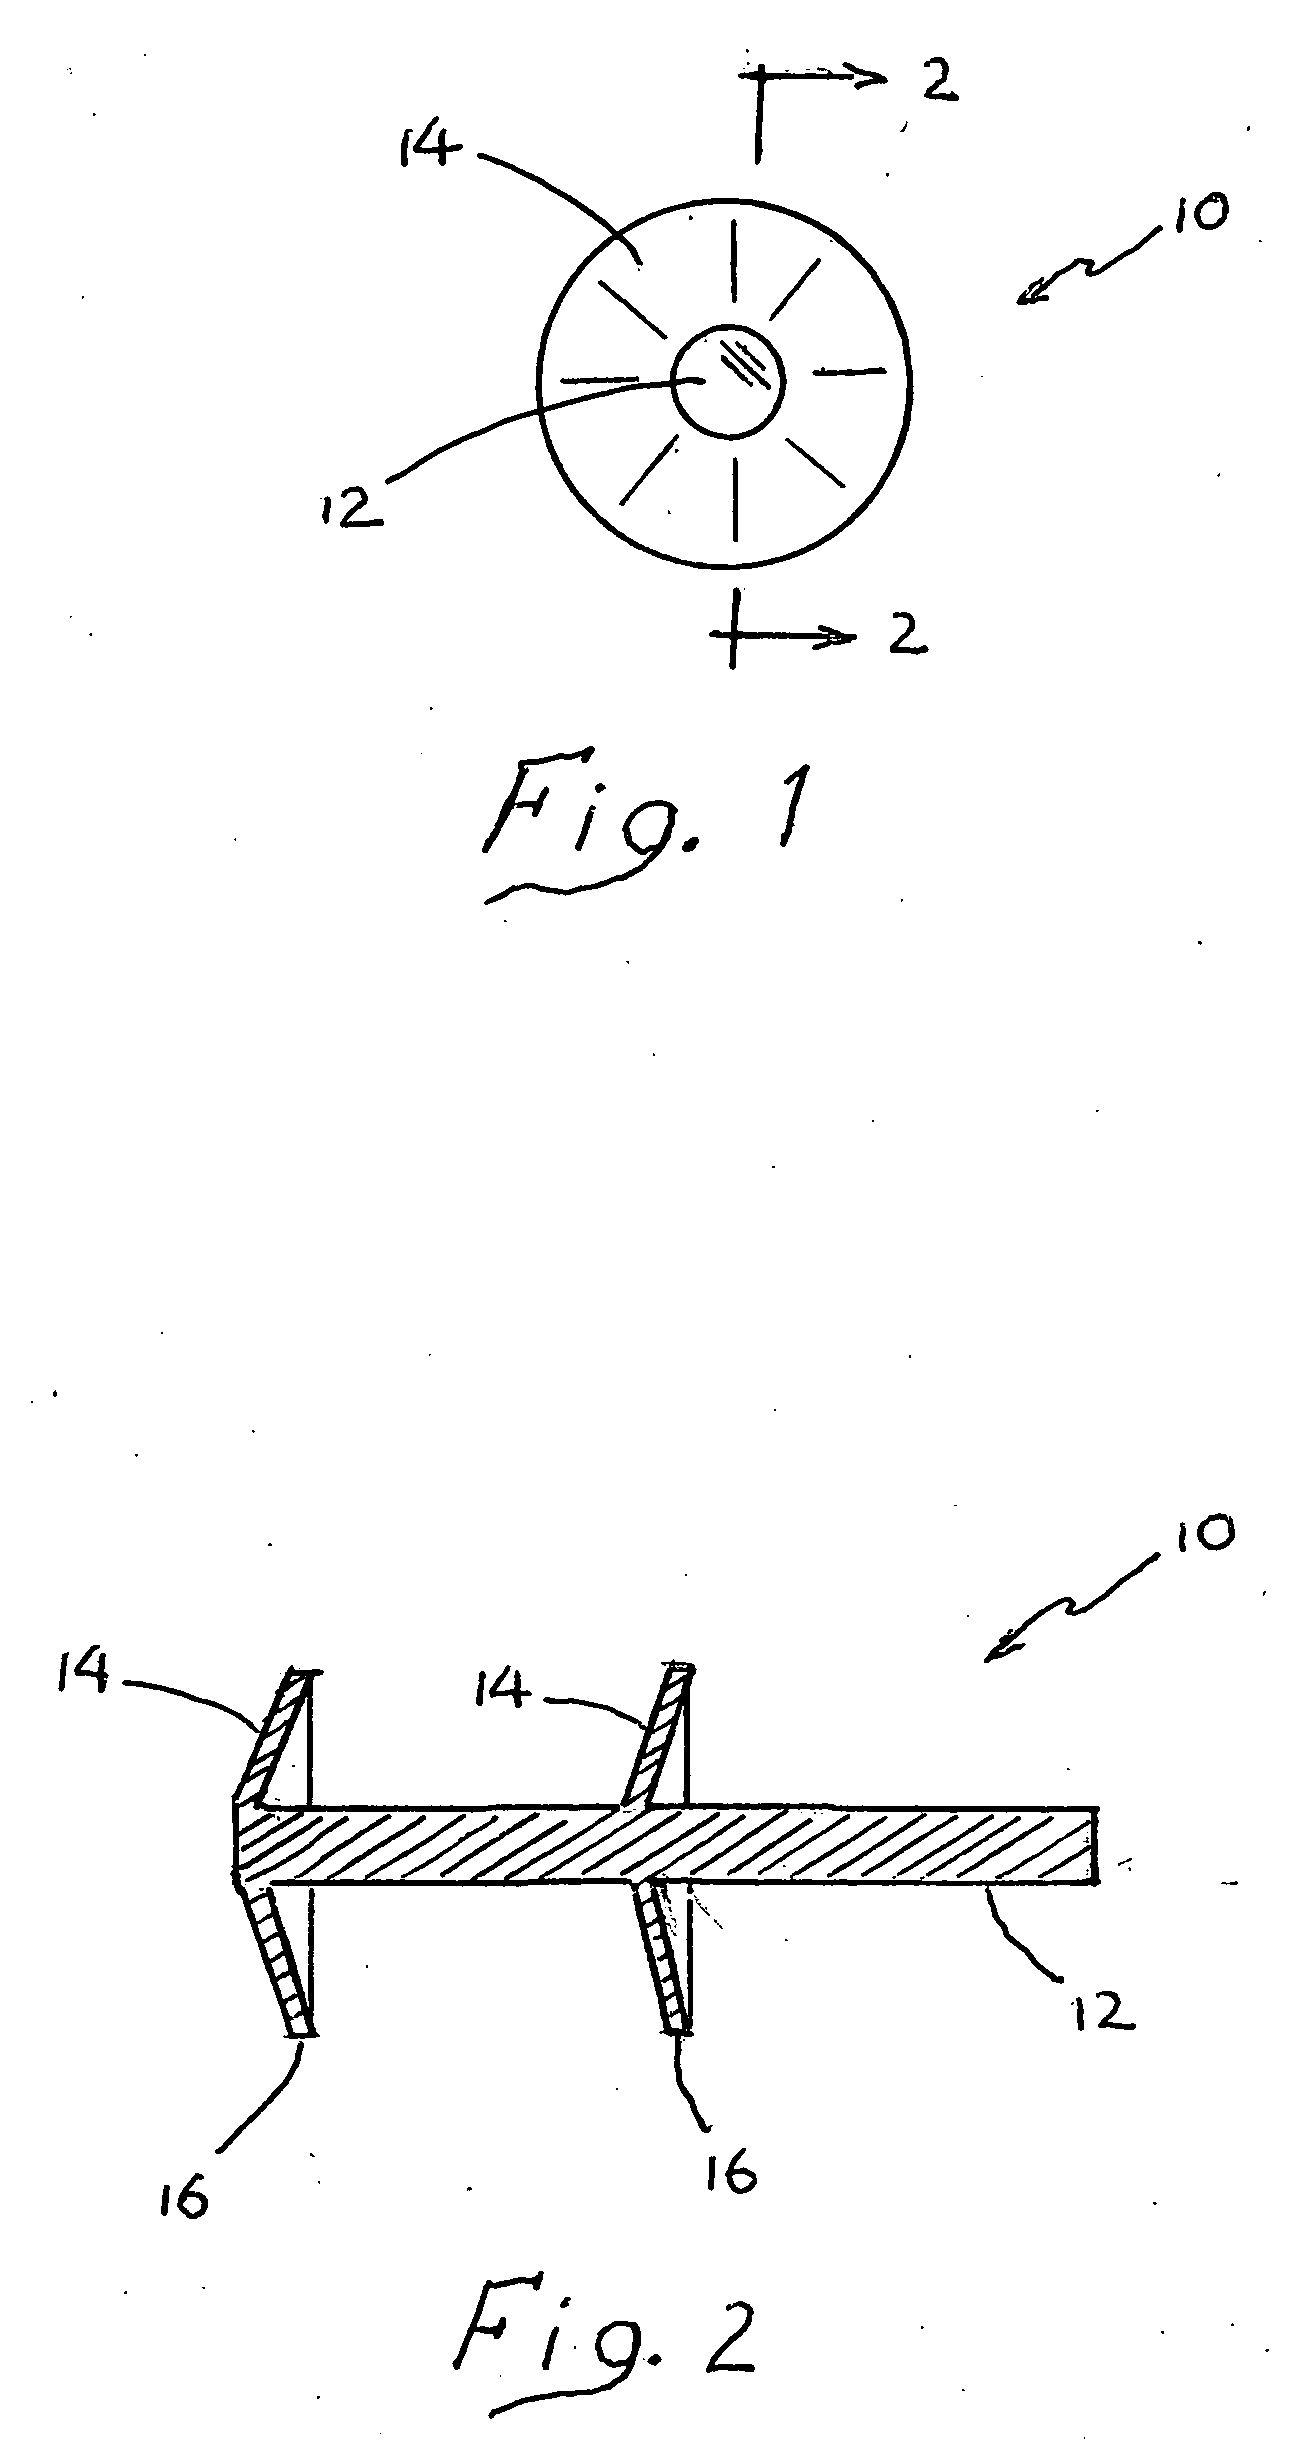 Method and apparatus for temporarily stopping the flow in a live fluid carrying pipe